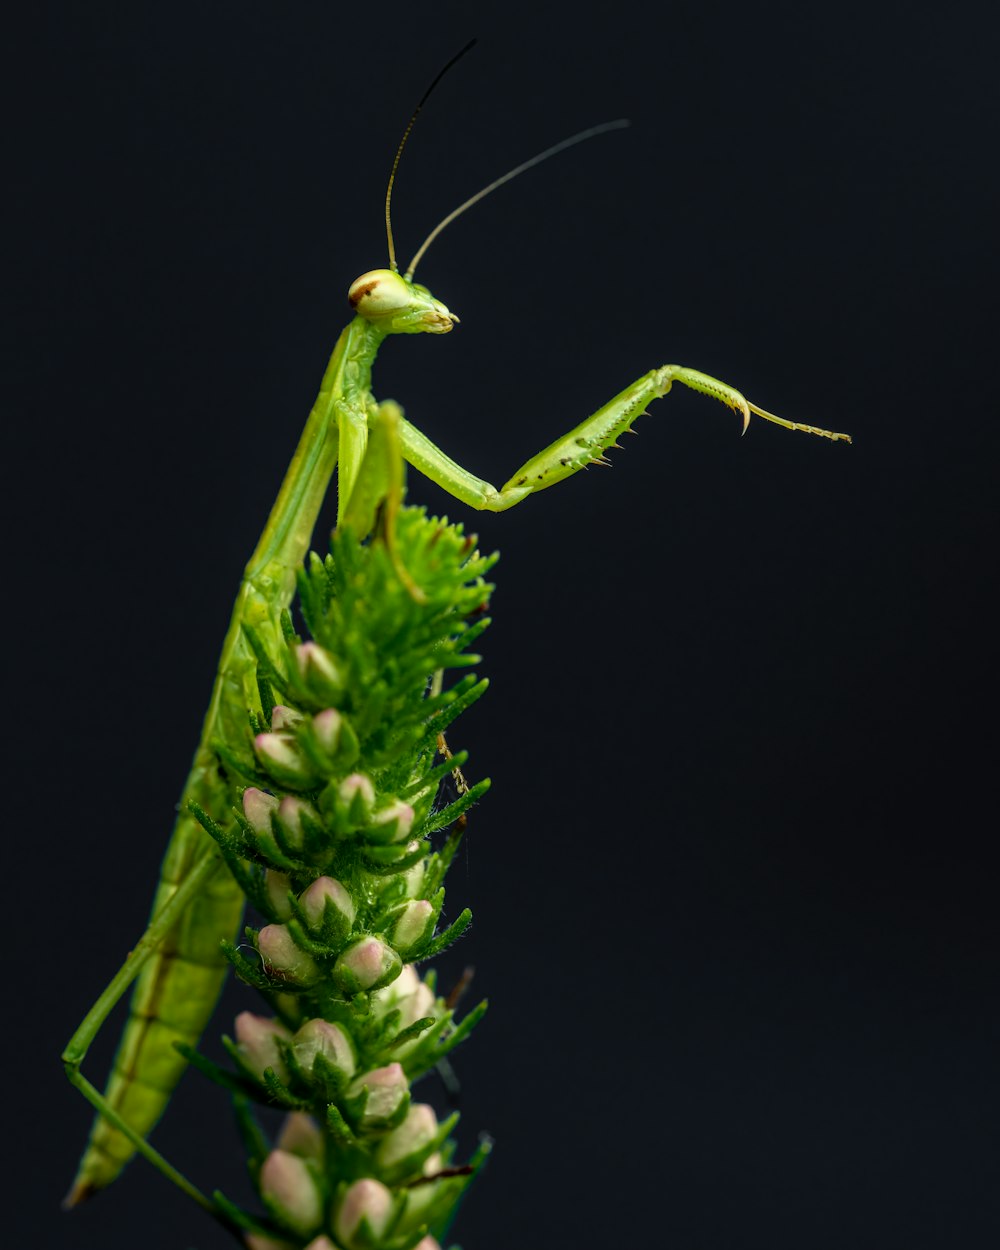 a green insect on a plant